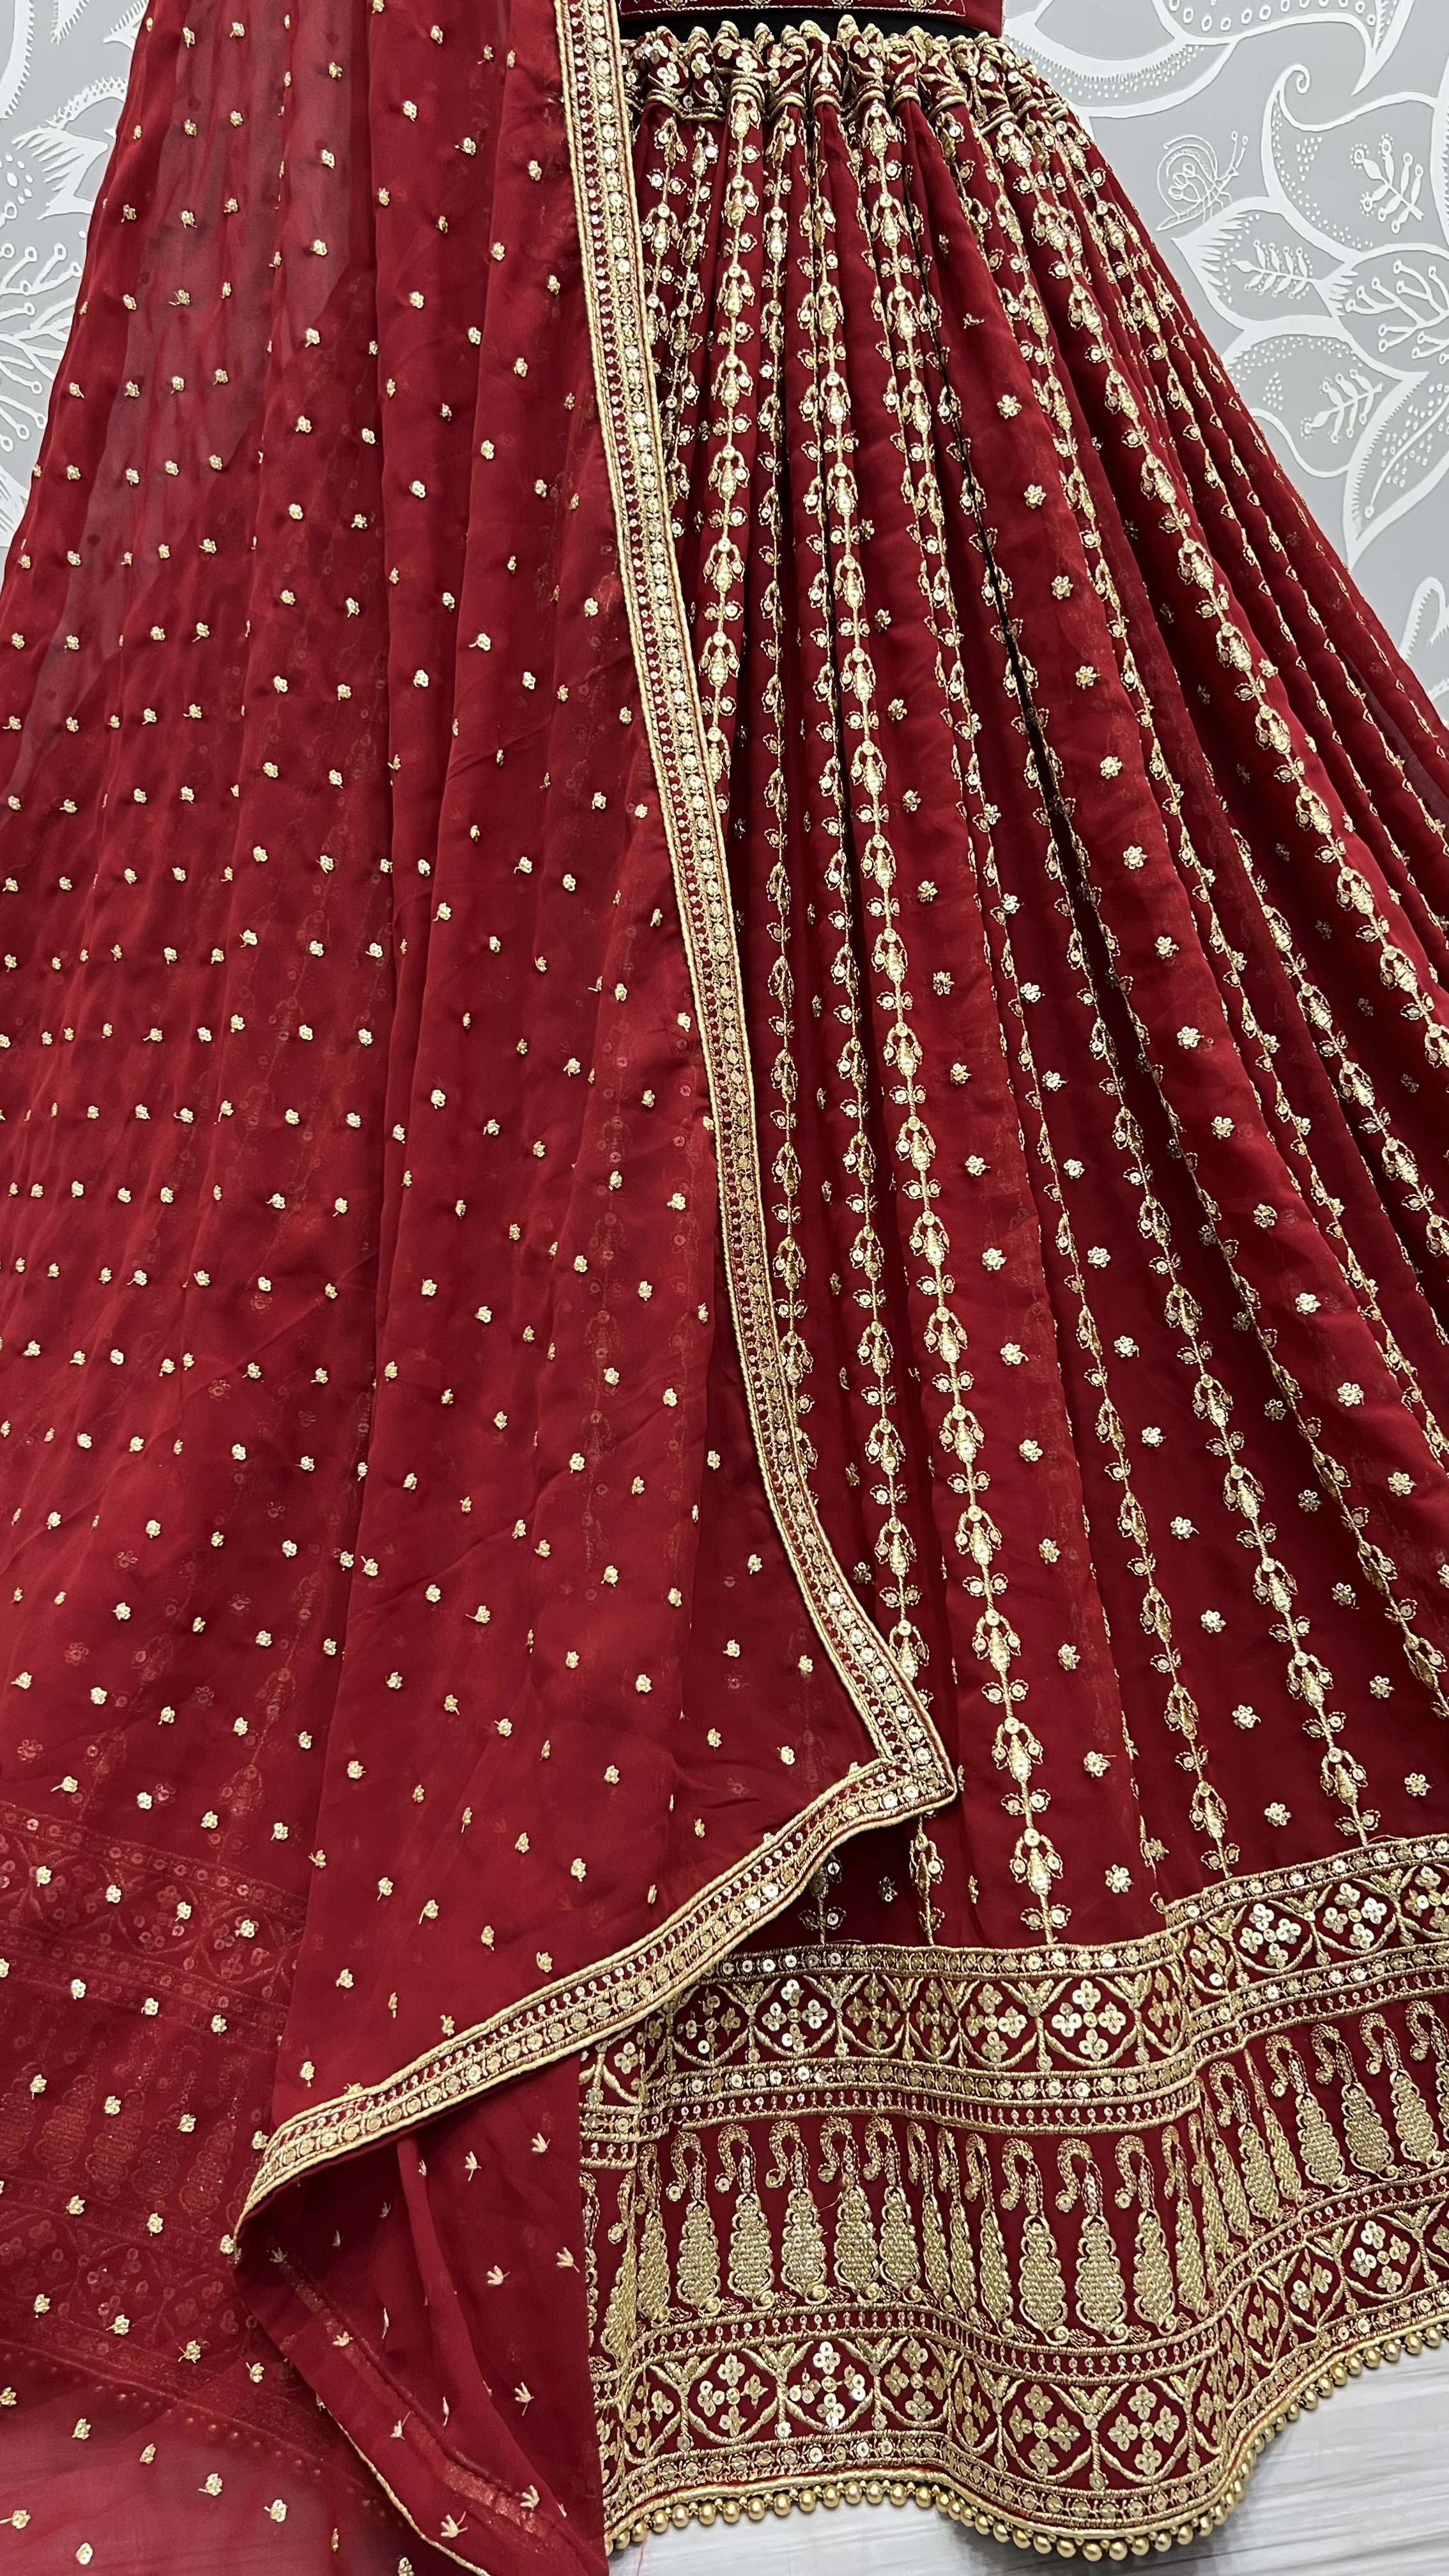 Smoothest blooming Georgette effect-full embroidered Flared wedding Lehengacholi in maroon and purple too